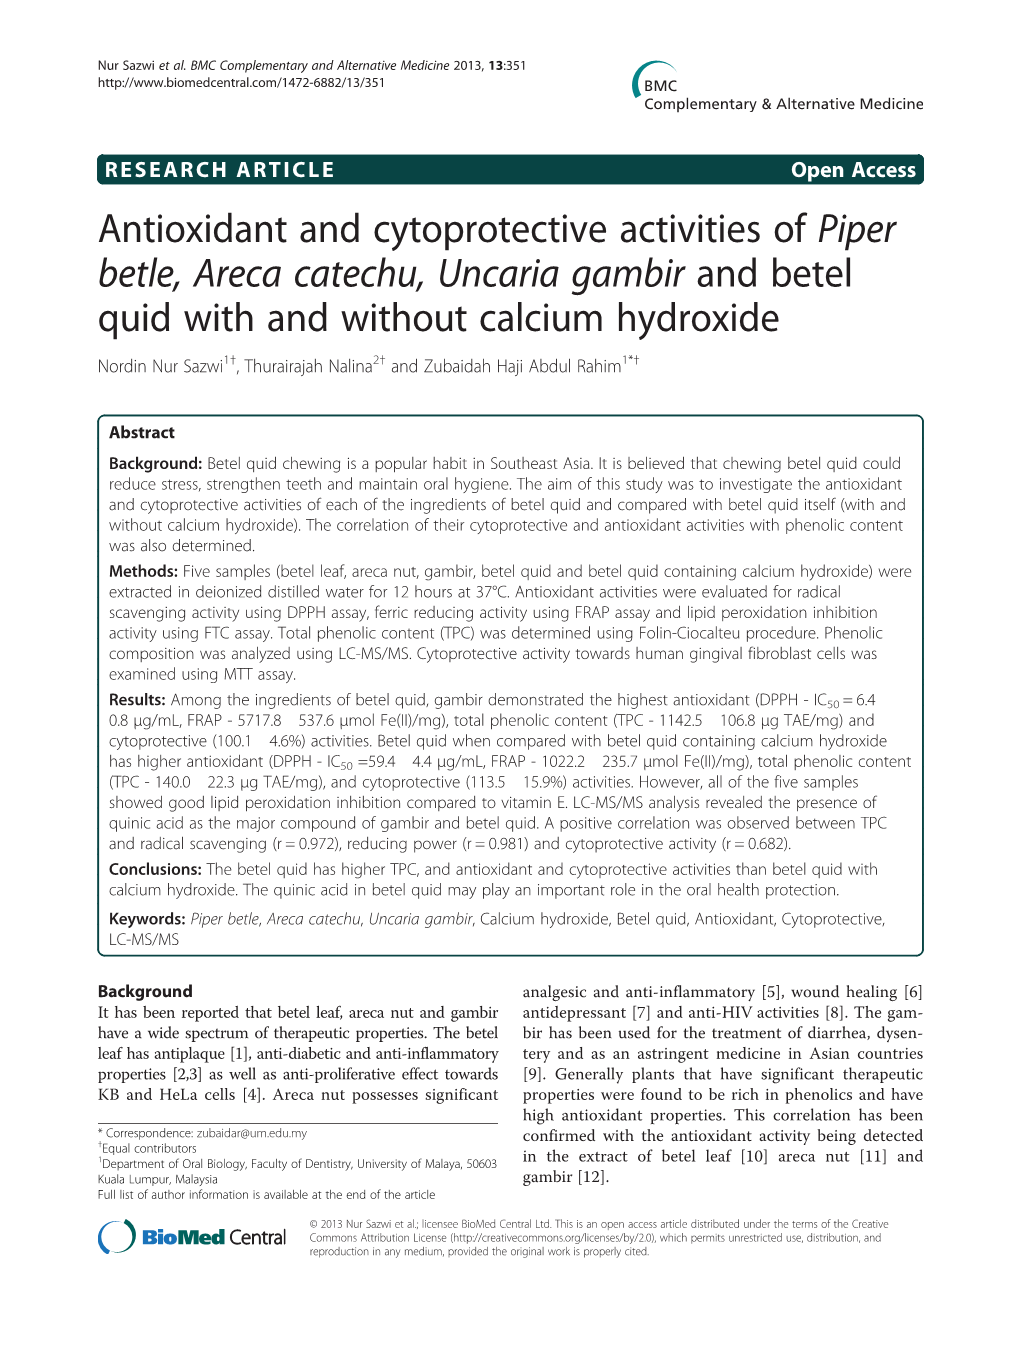 Antioxidant and Cytoprotective Activities of Piper Betle, Areca Catechu, Uncaria Gambir and Betel Quid with and Without Calcium